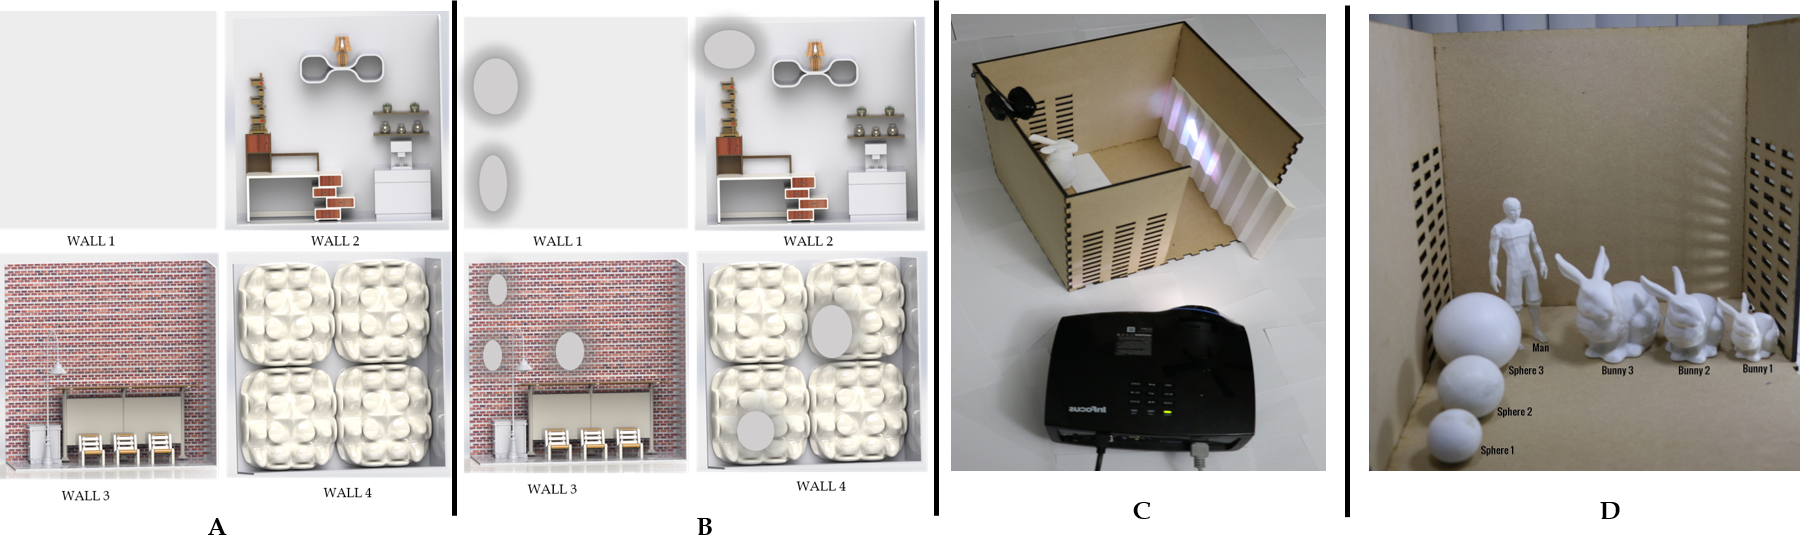 (A)The various LOS scenes used for experiments; (B) The LOS scenes with optimal adaptive lighting patterns visualized; (C) Real experimental prototype in the lab; (D) The 3D printed objects used in real experiments.